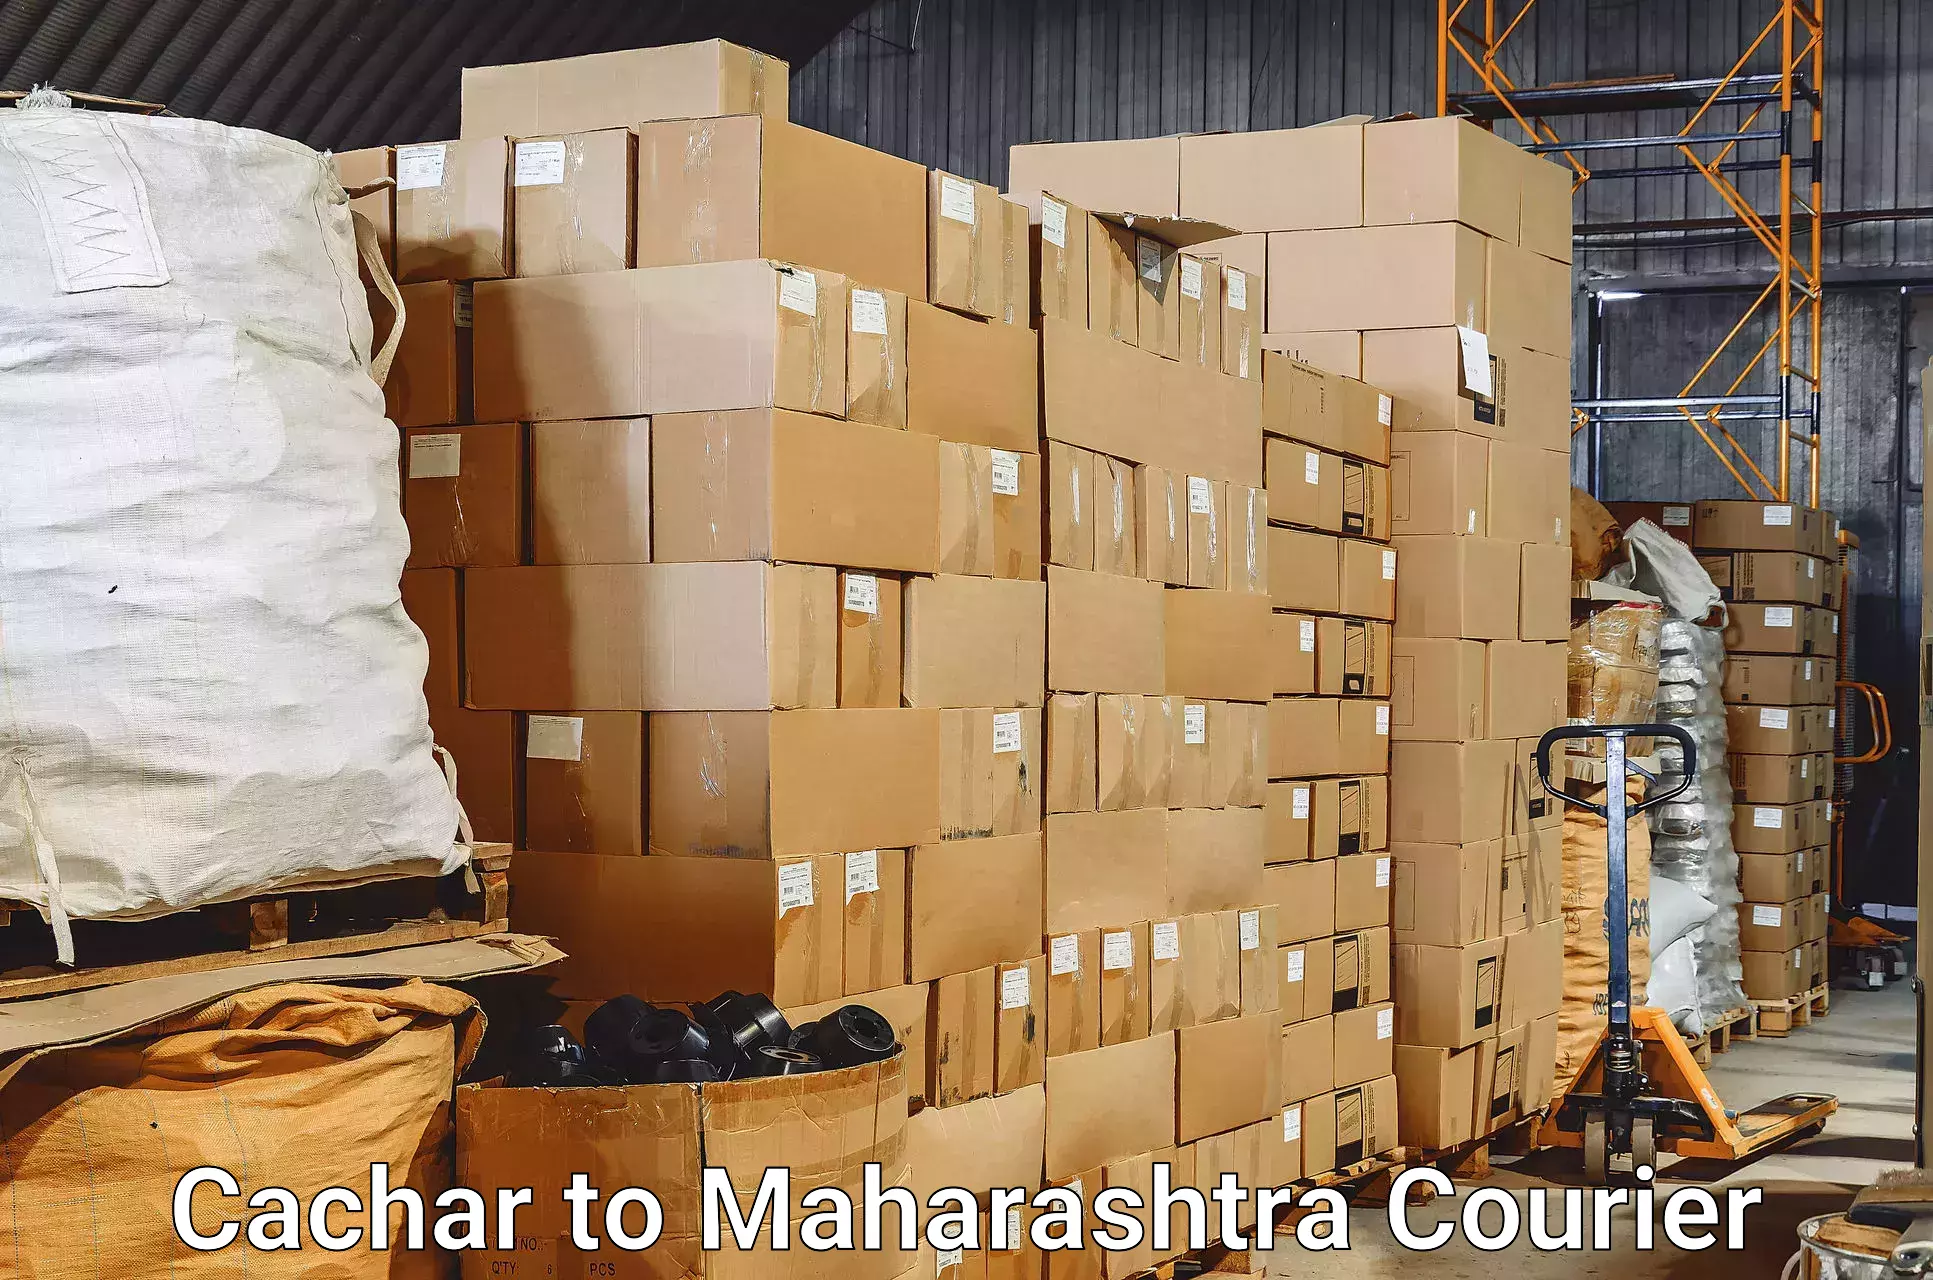 High-quality baggage shipment in Cachar to Latur